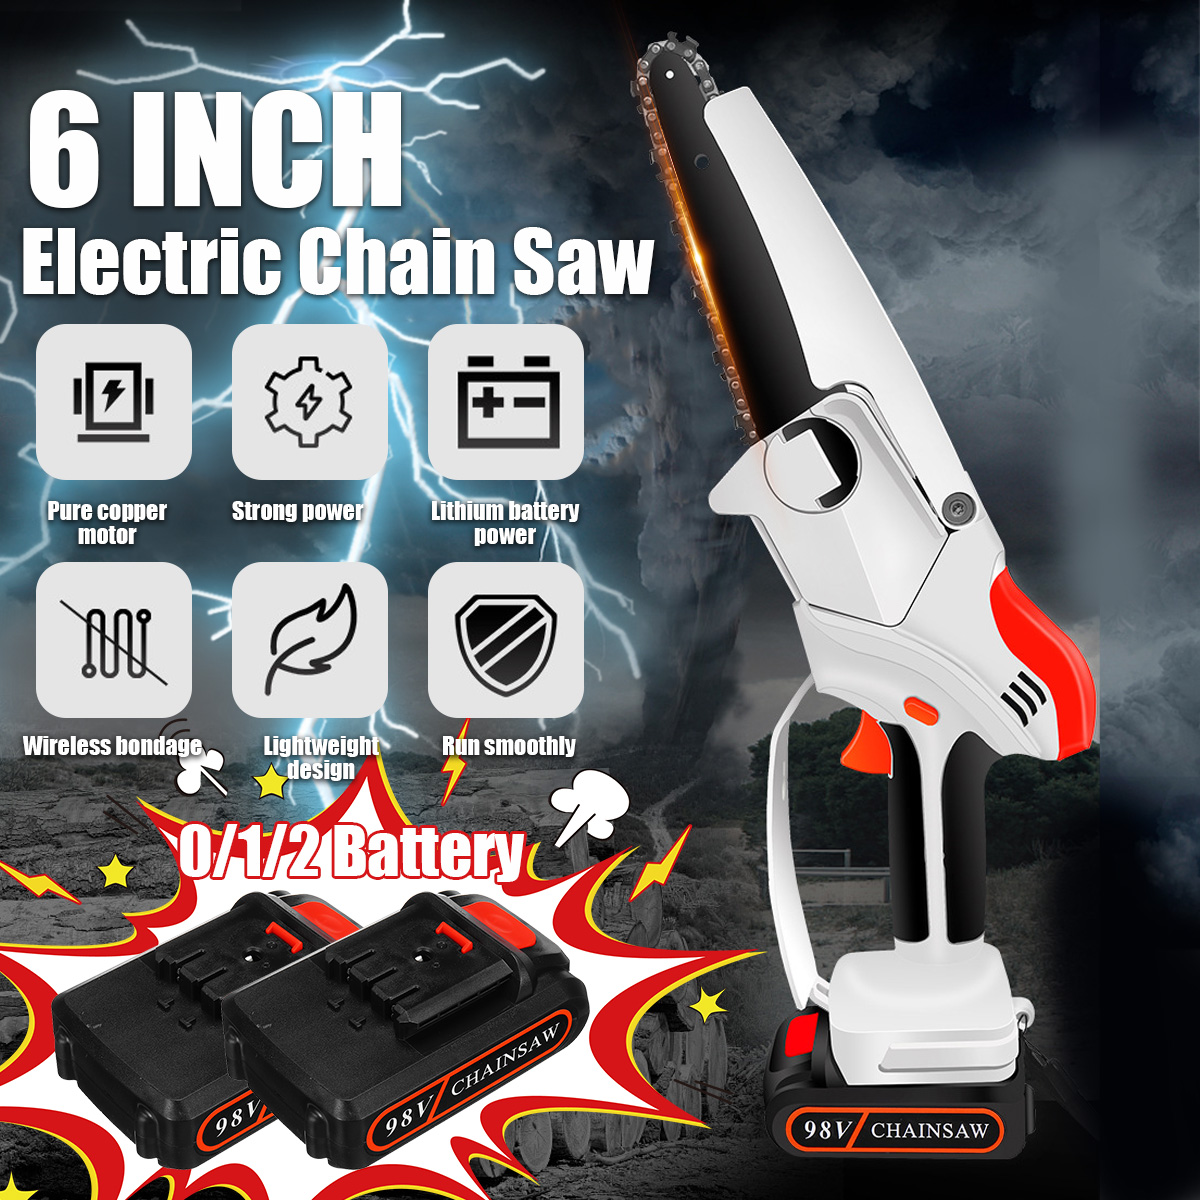 98VF-6Inch-Cordless-Electric-Chain-Saw-Rechargeable-Wood-Cutter-Woodworking-Tool-W-None-or1or2-Batte-1879171-2